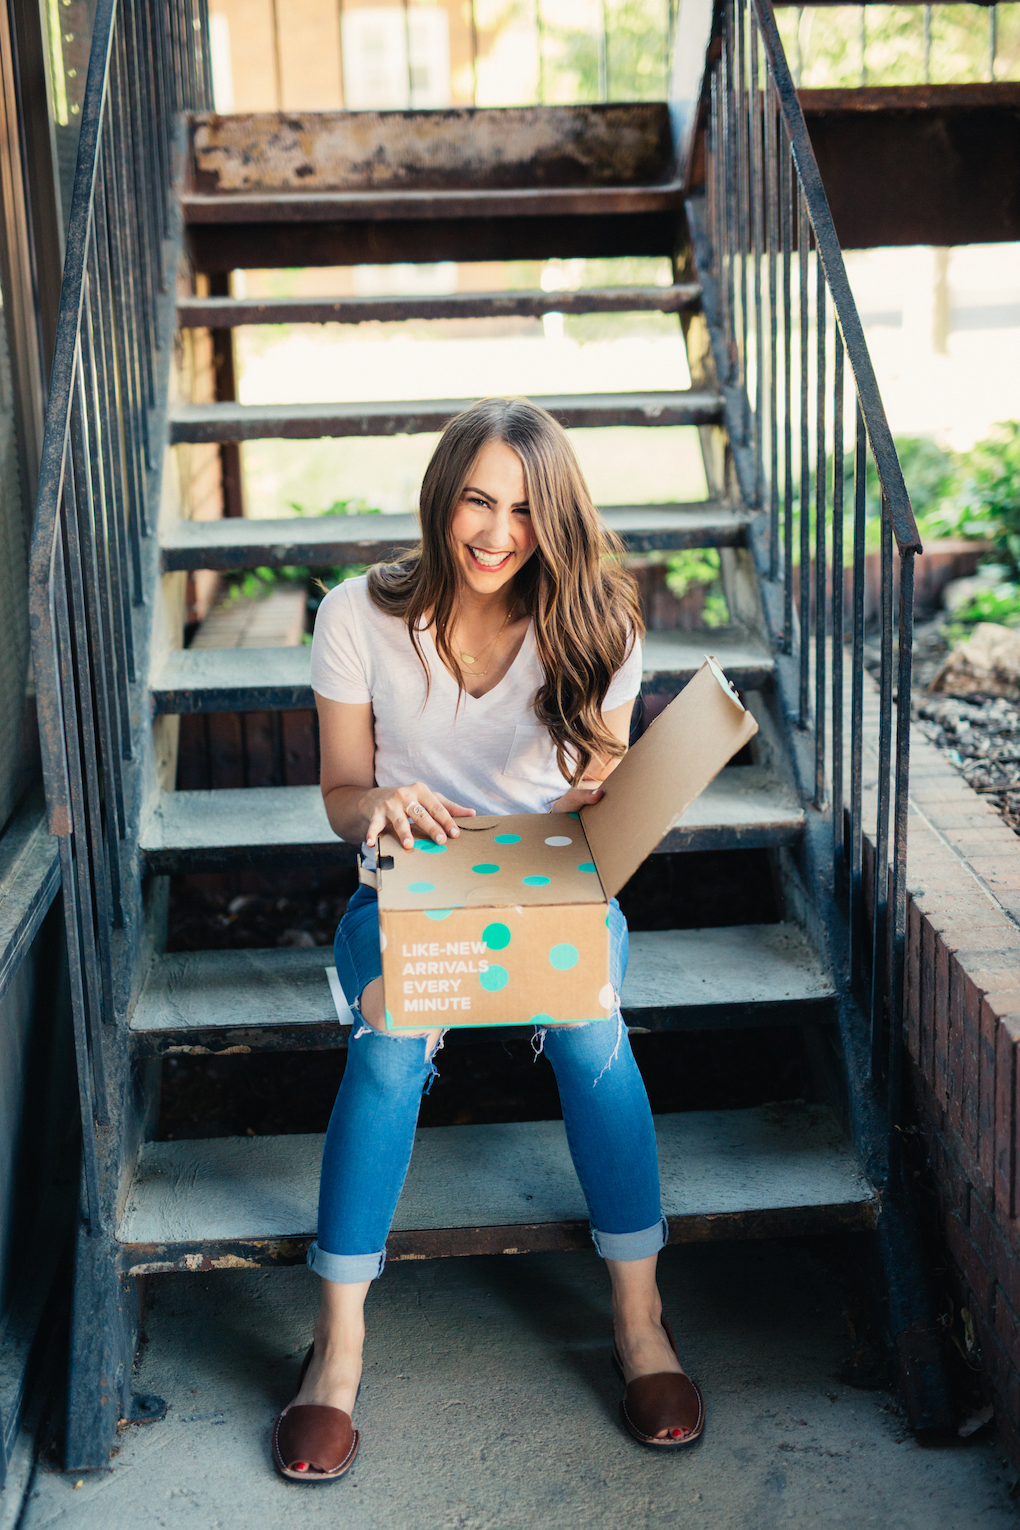 Girl with long brown curled hair in white madewell v-neck unboxing thredup box